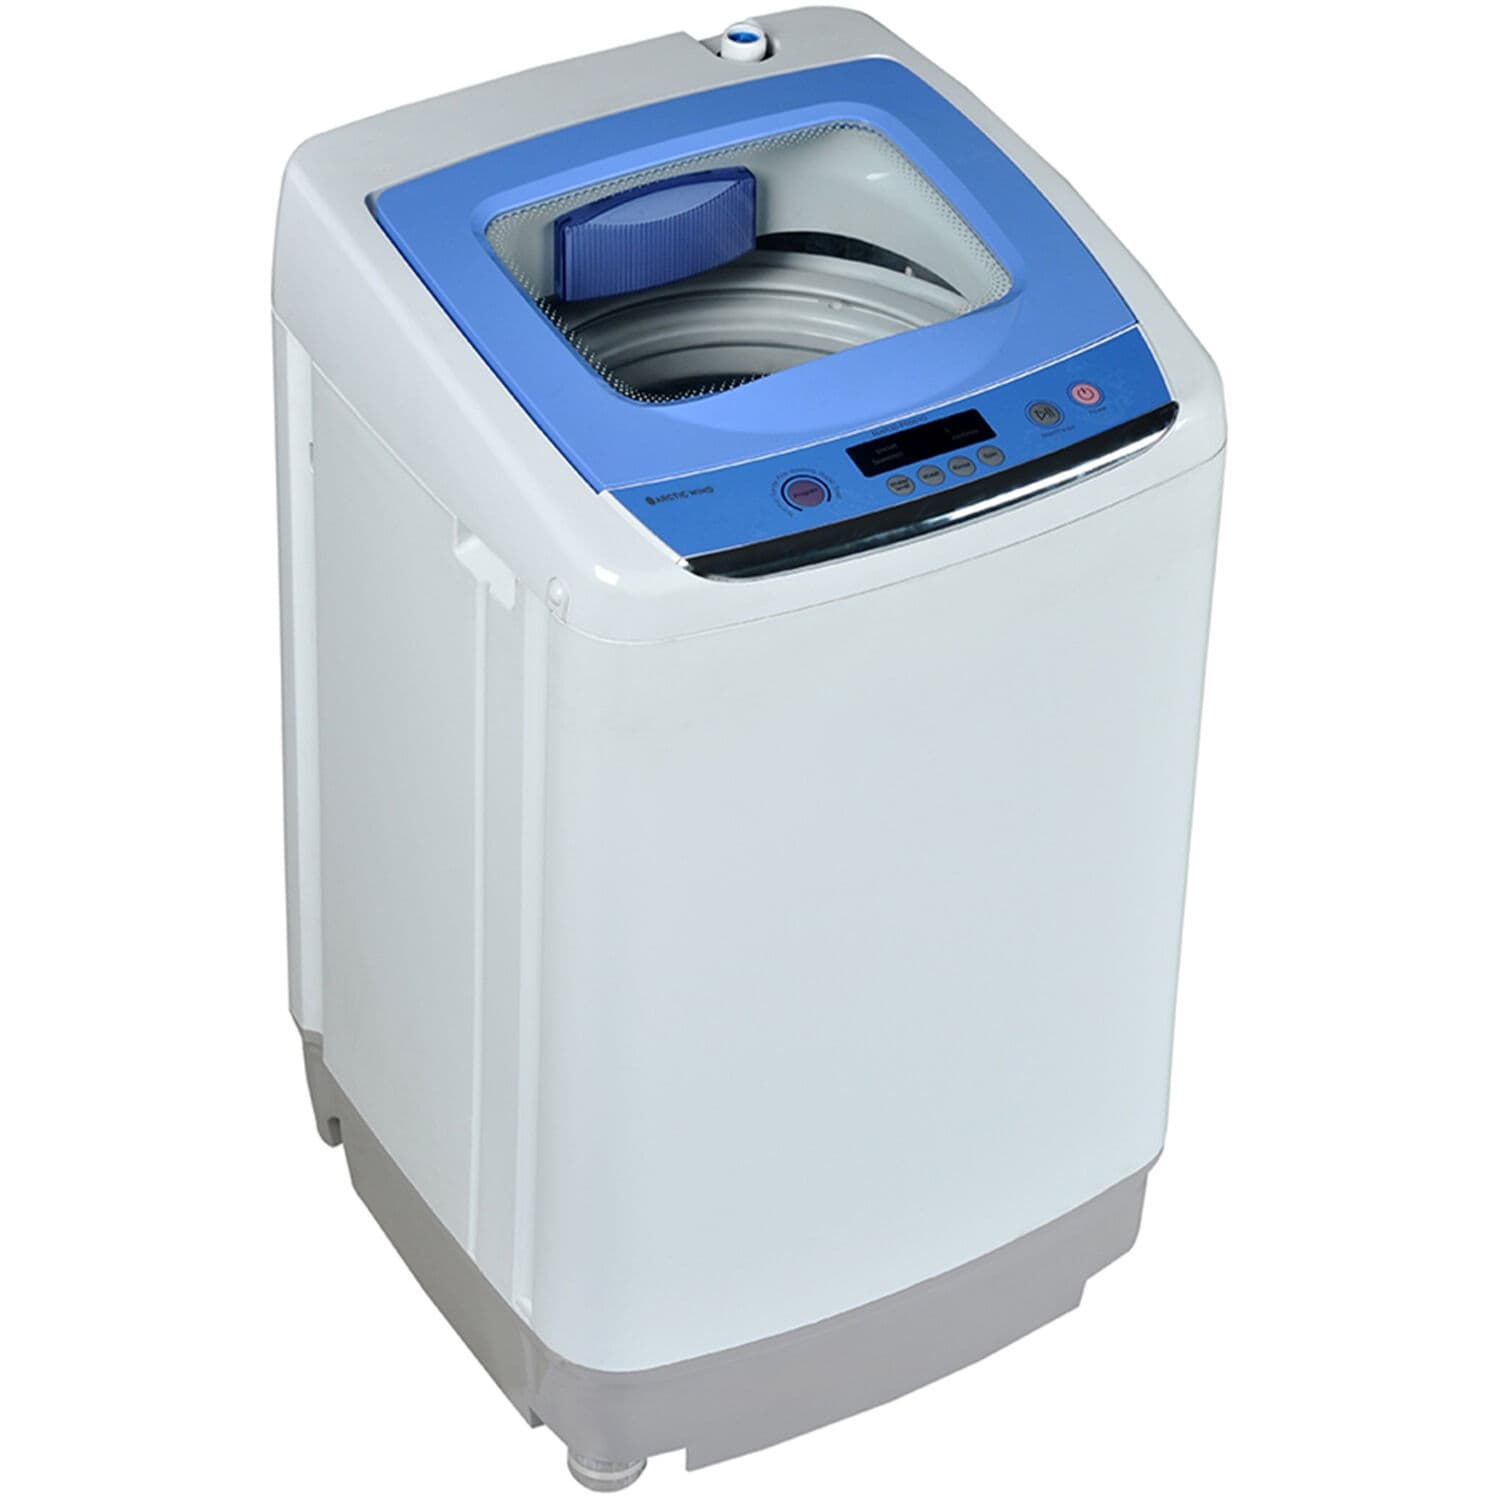 https://ak1.ostkcdn.com/images/products/is/images/direct/0927062a7a65c4540ccd6baf8928f3eee4b527fa/Arctic-Wind-0.9-Cu.-Ft.-Portable-Washer.jpg